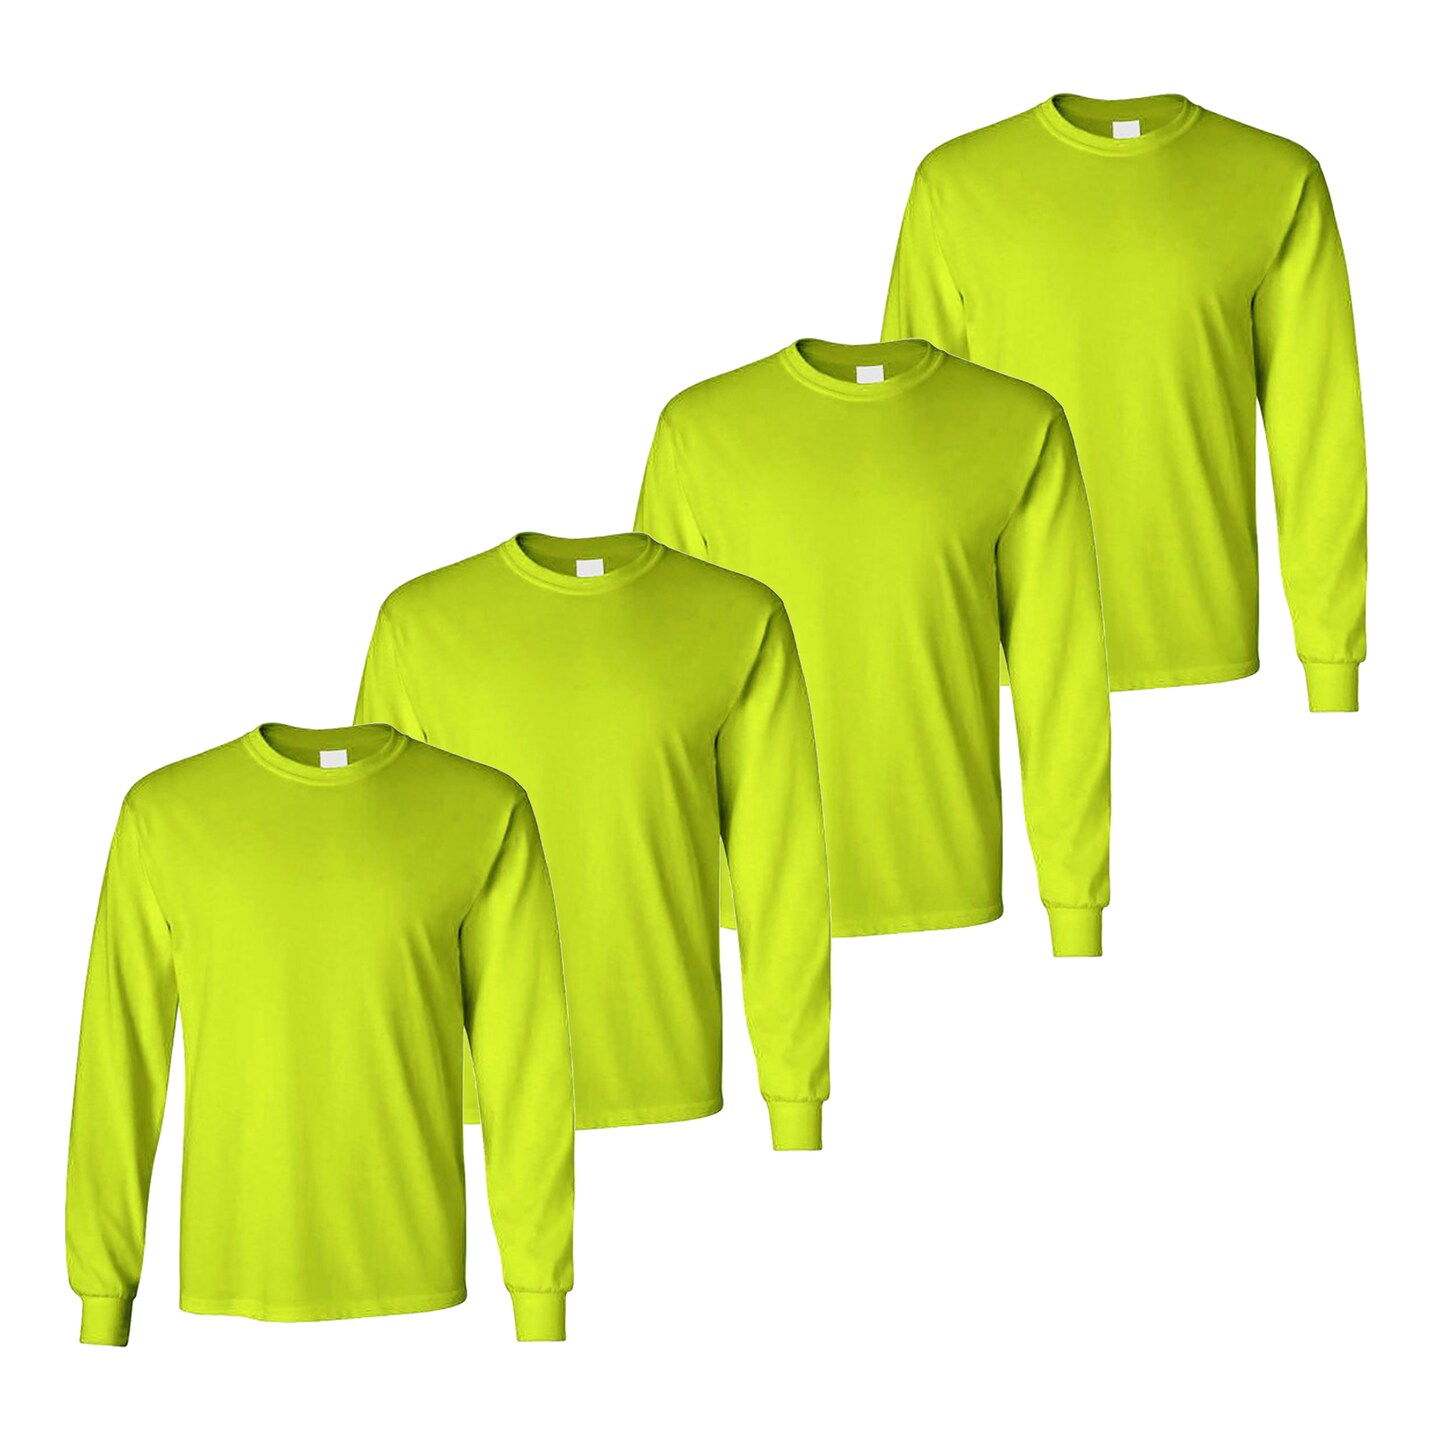 Safety Green Construction T-Shirts for Men-Long Sleeve (Ropa De Trabajo) -  Multipack for Construction Work, Roadwork, and More | RADYAN®